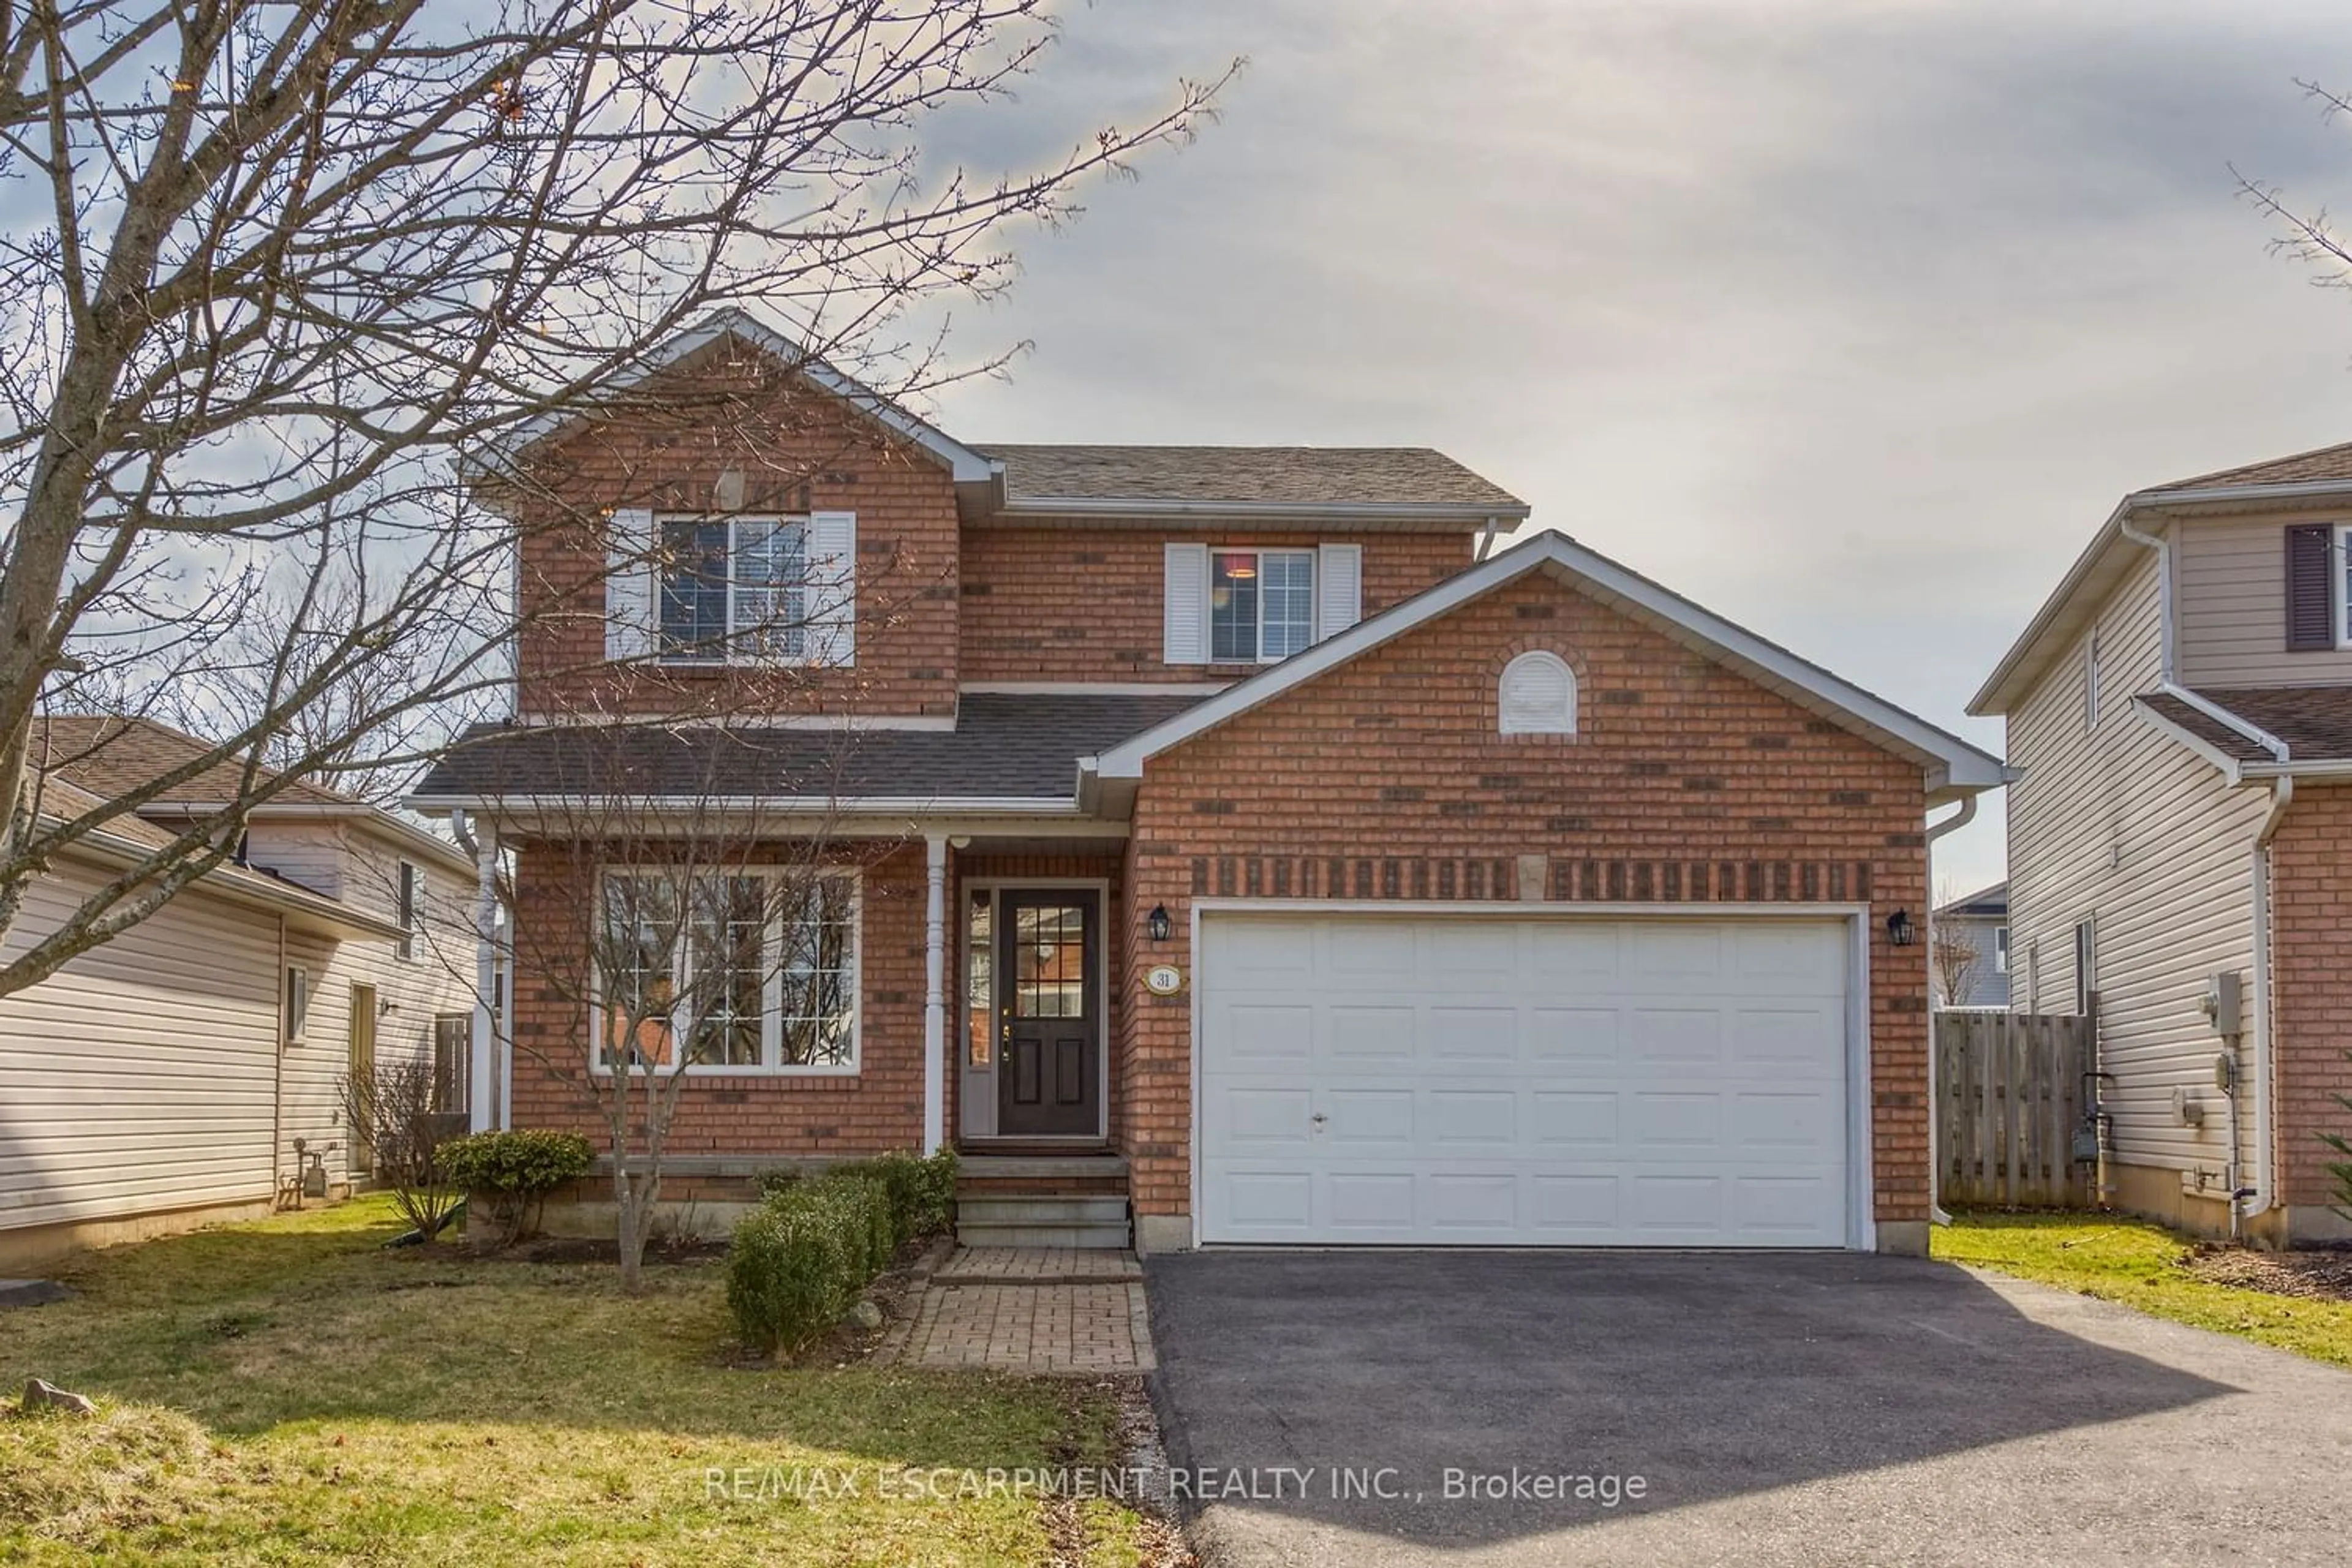 Home with brick exterior material for 31 Glengary Cres, Haldimand Ontario N3W 2L7